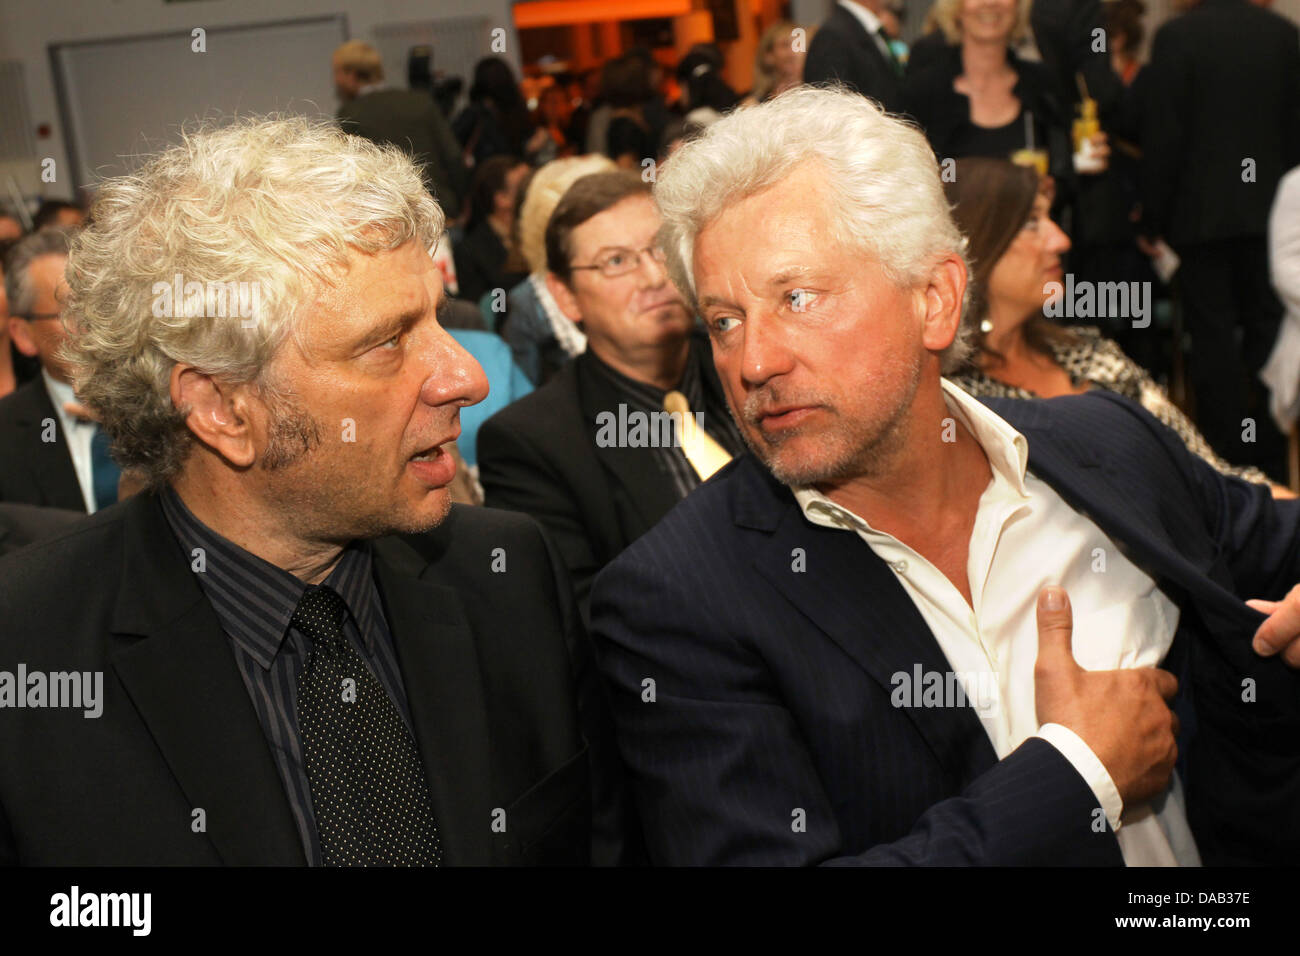 The police inspectors of the TV series Tatort Udo Wachtveitl (L) and Miroslav Nemec (R) talk to each other during the gala evening of the crime fiction festival 'Tatort Eifel' in Daun, Germany, 24 September 2011. They were honoured with the Roland Film Prize earlier. The prize is named after the crime fiction director Juergen Roland and is awarded every two years. Photo: Thomas Fre Stock Photo